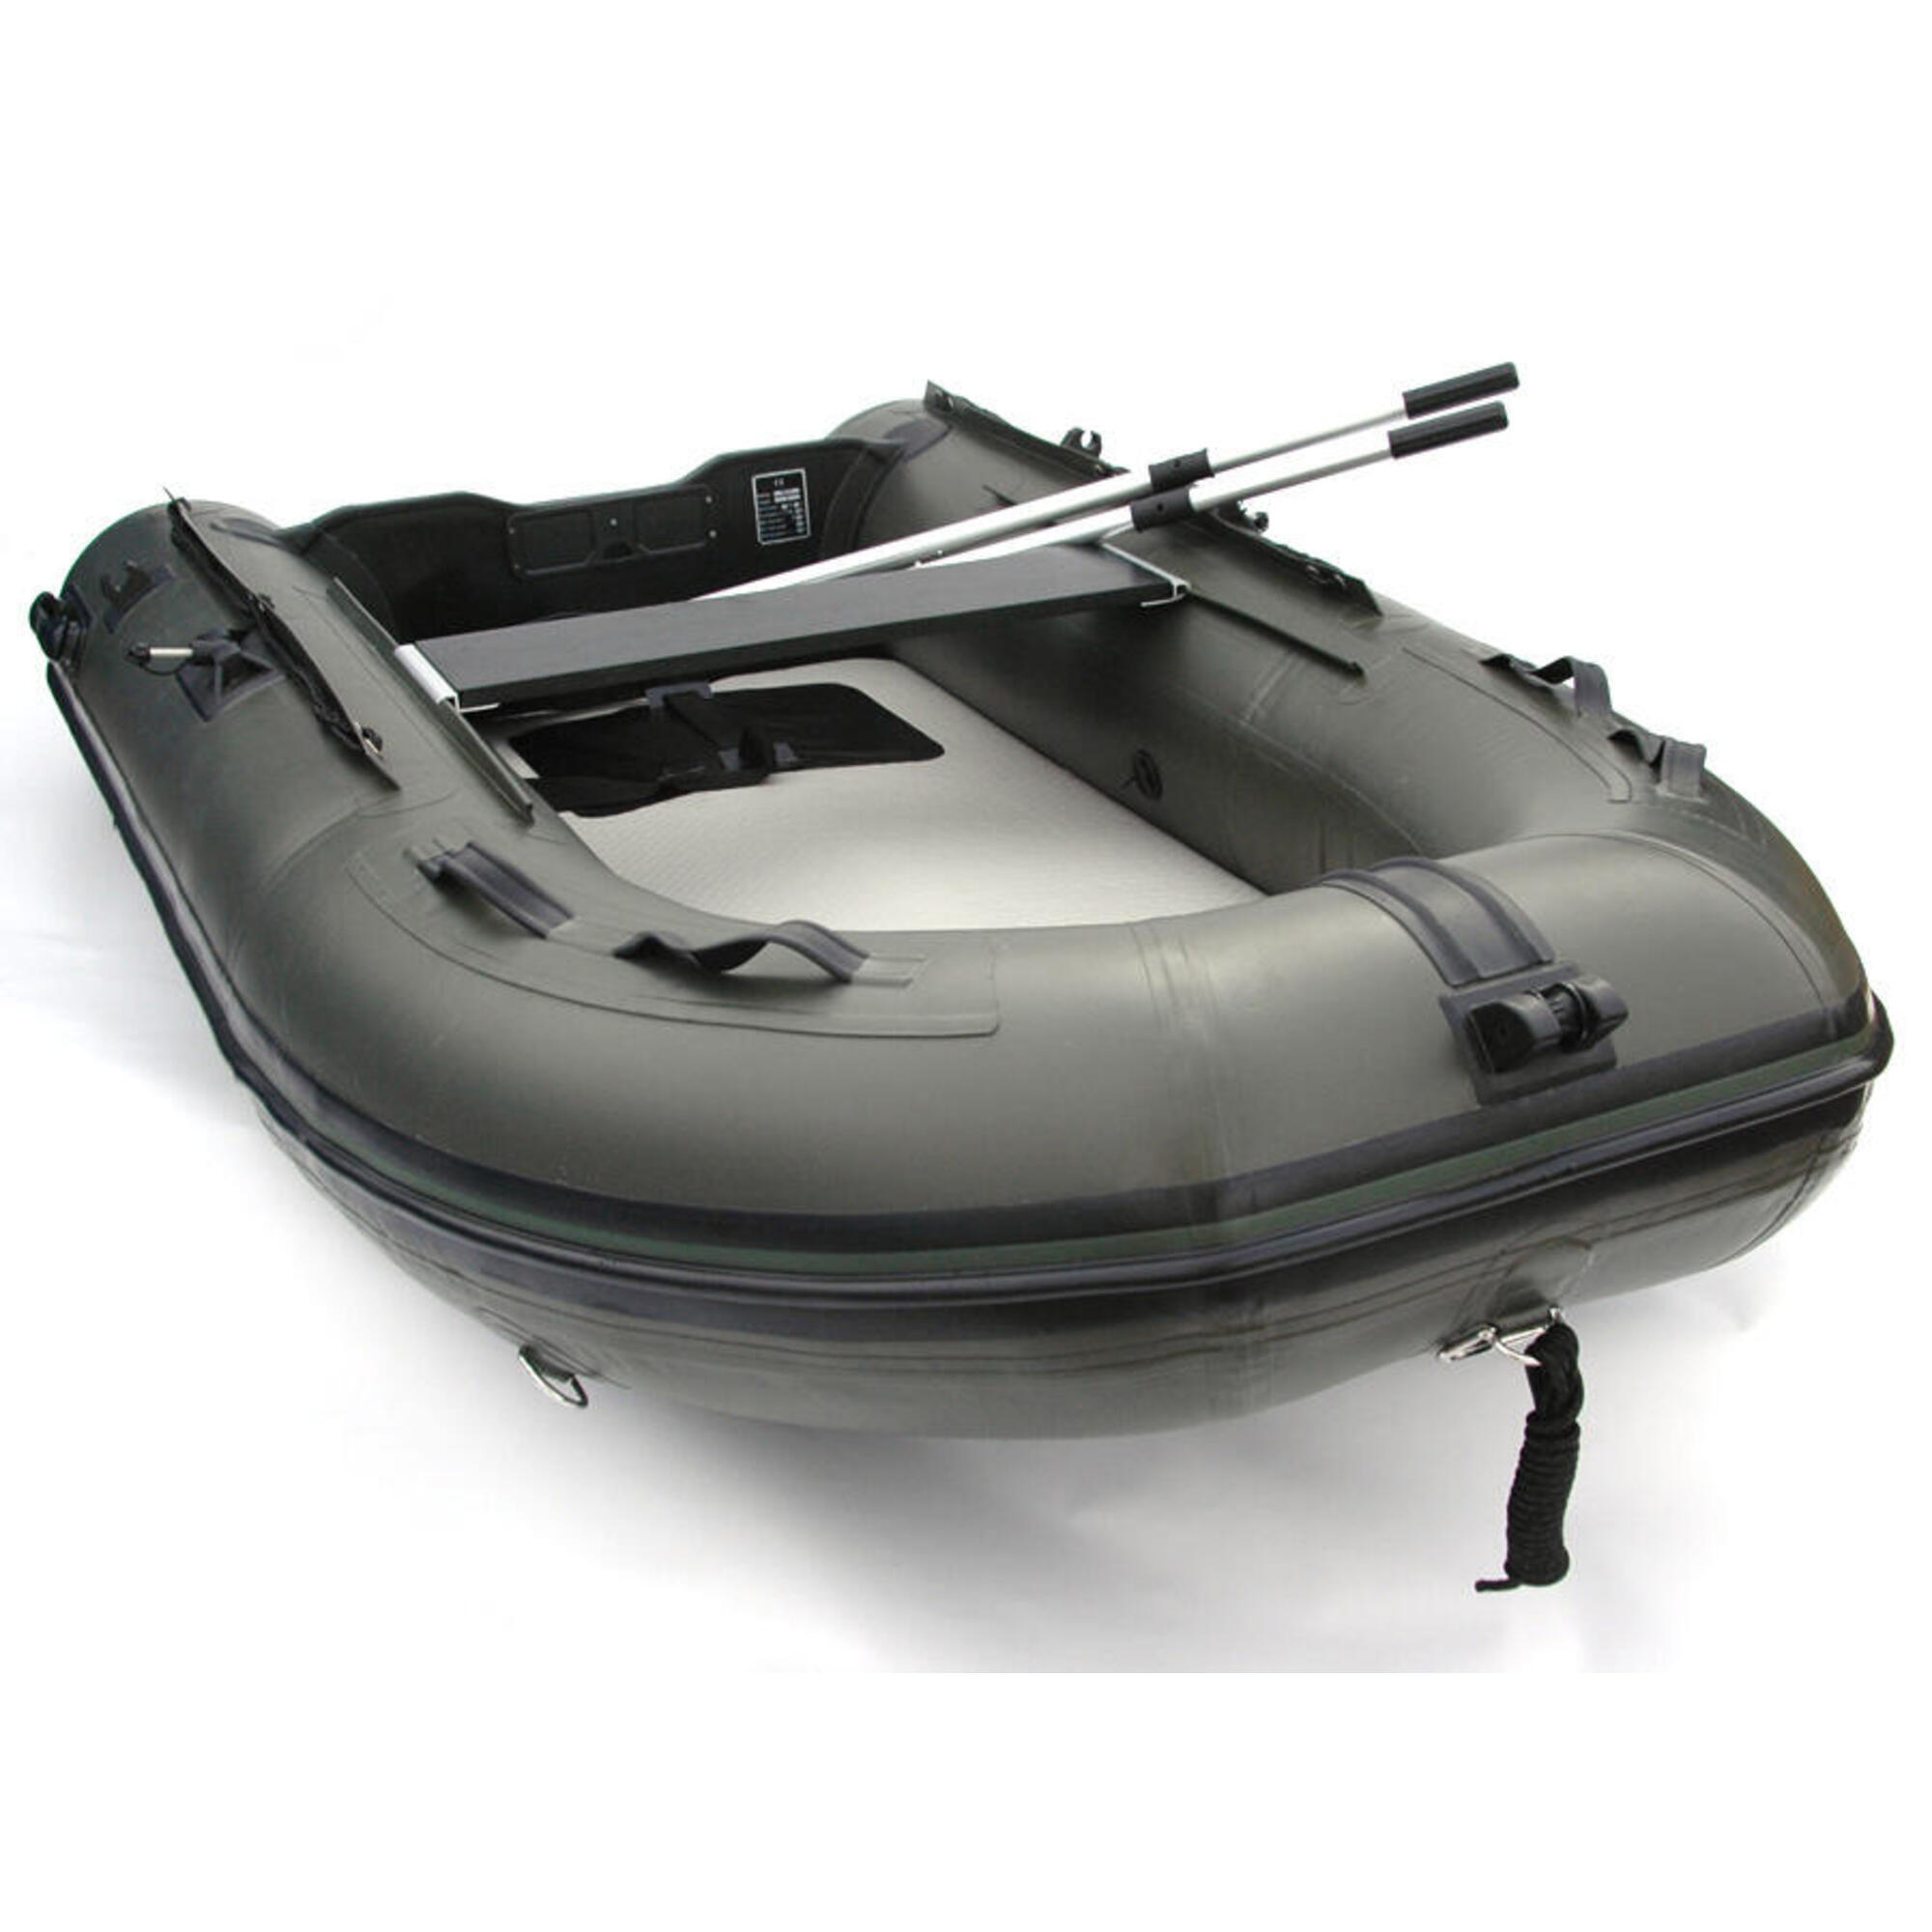 BISON 2.7m Inflatable Fishing Sports Boat Rigid Air Deck